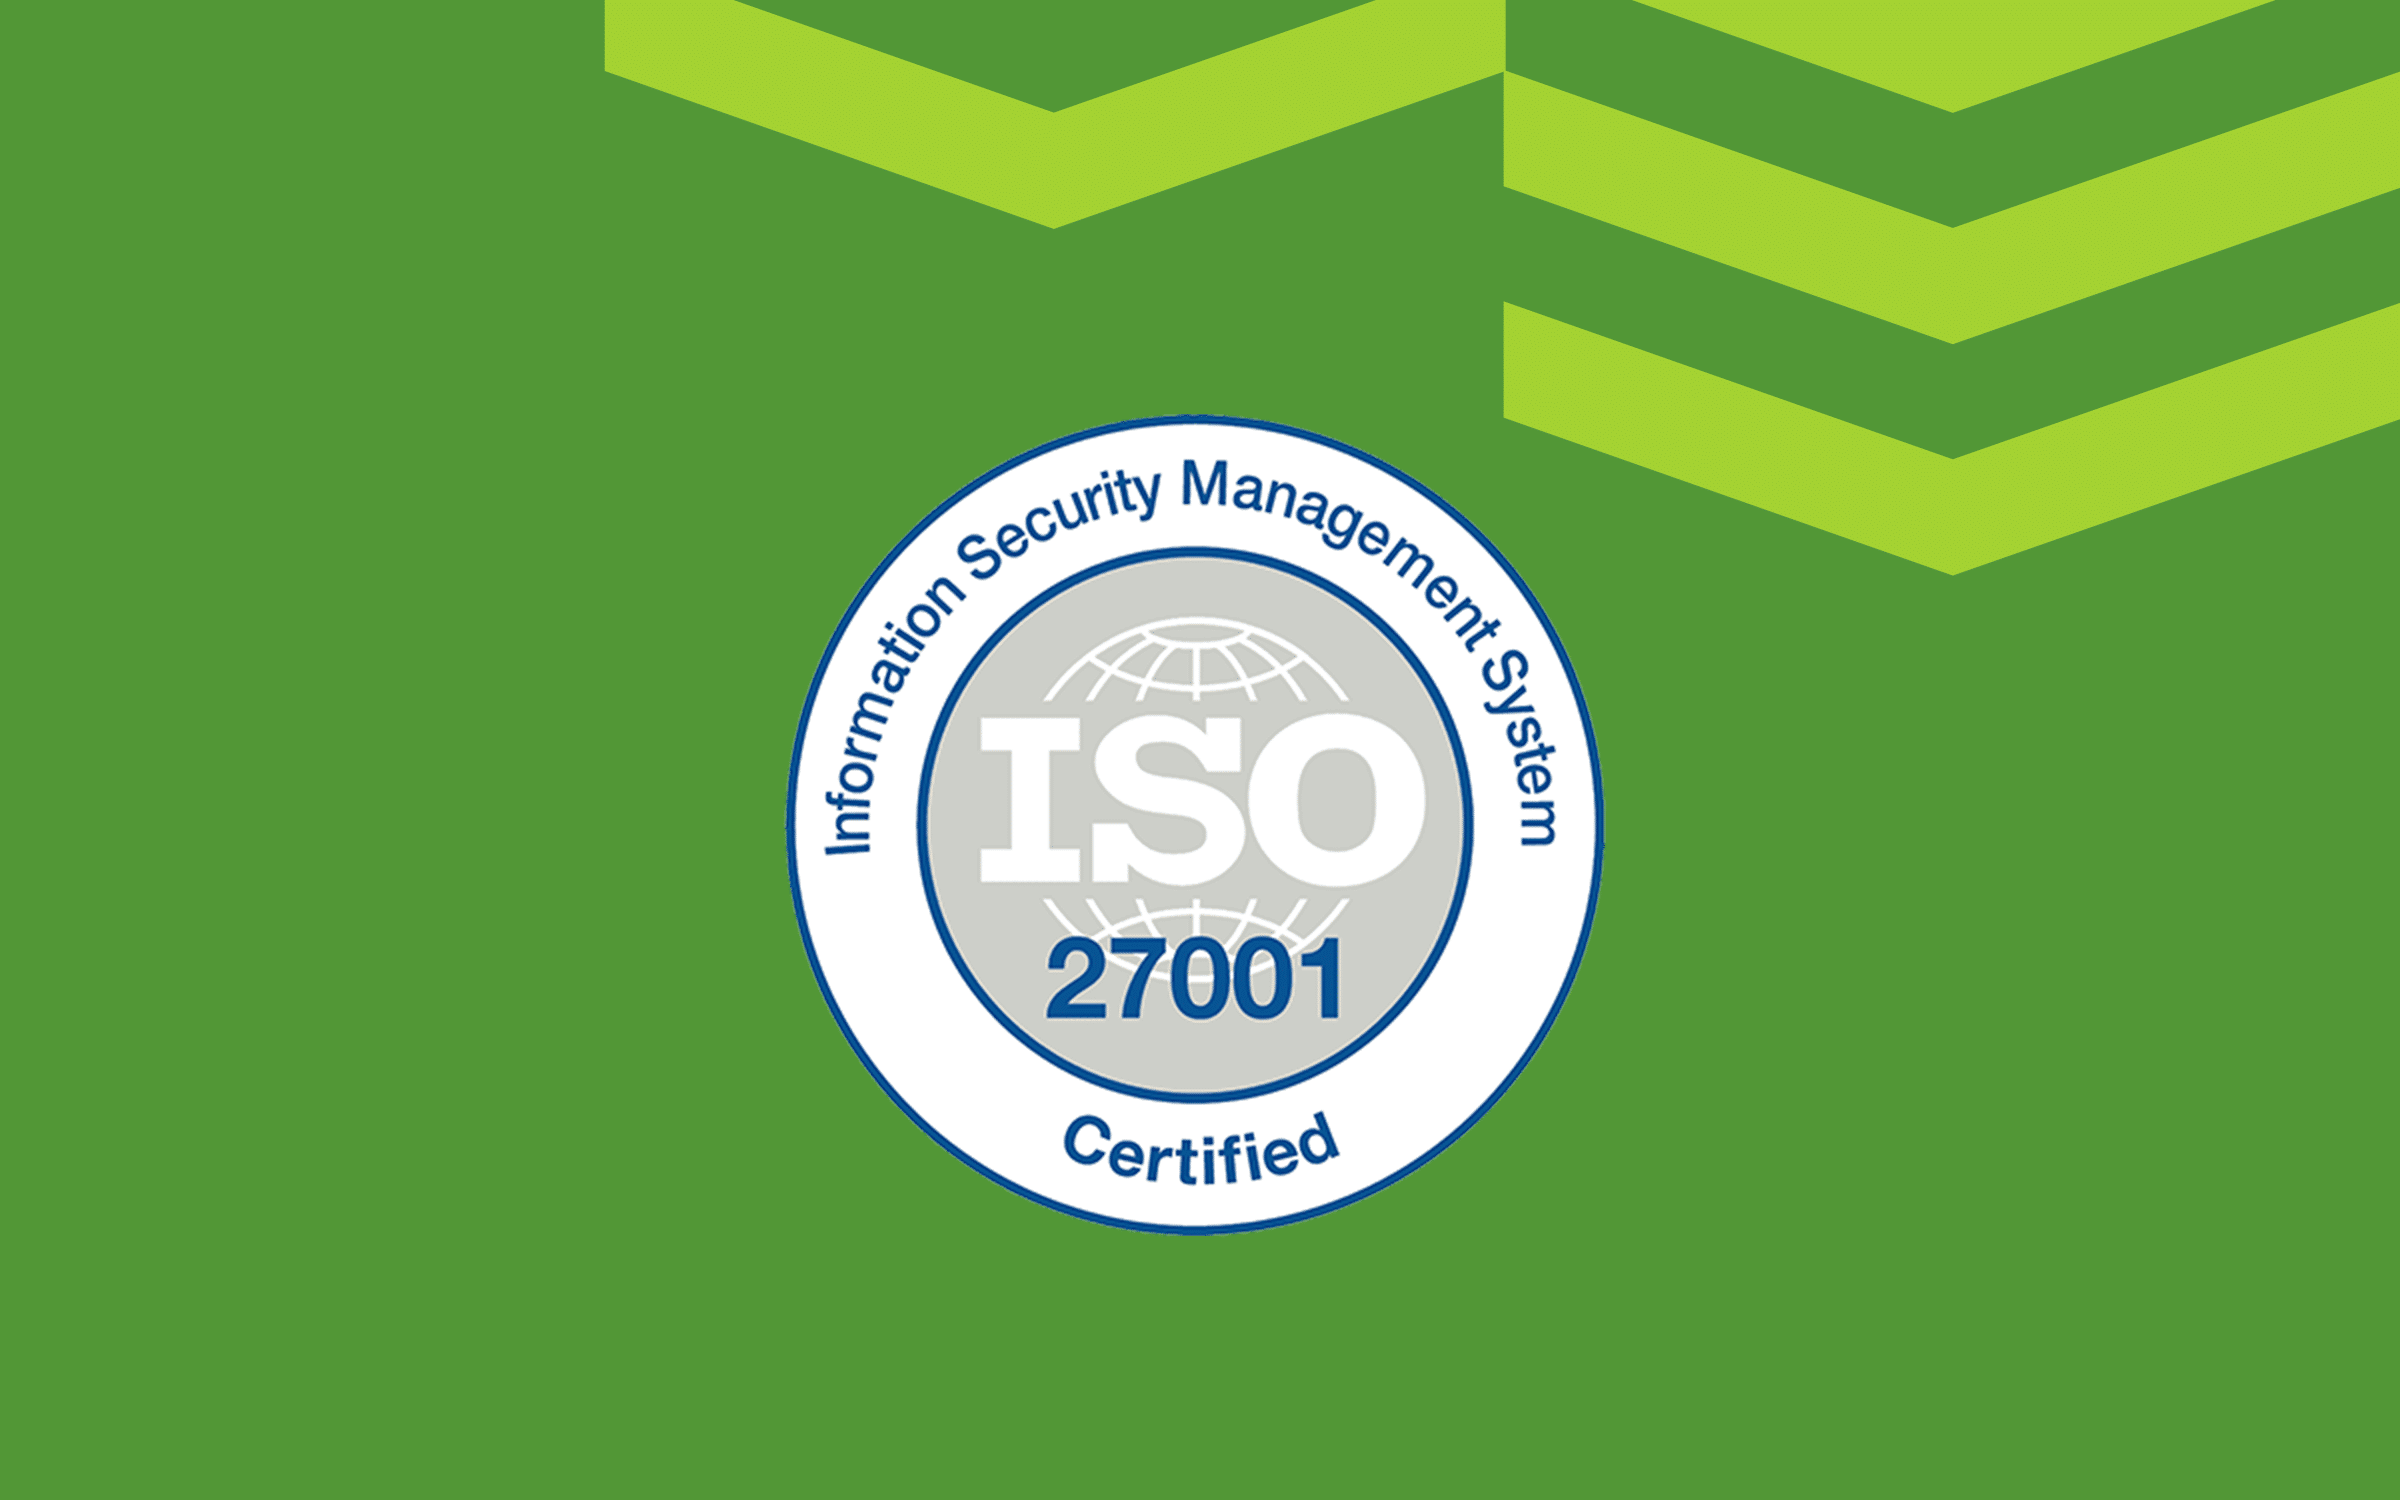 SugarCRM Achieves ISO 27001 Certification, Validating Commitment to Information Security and Trusted Data Management